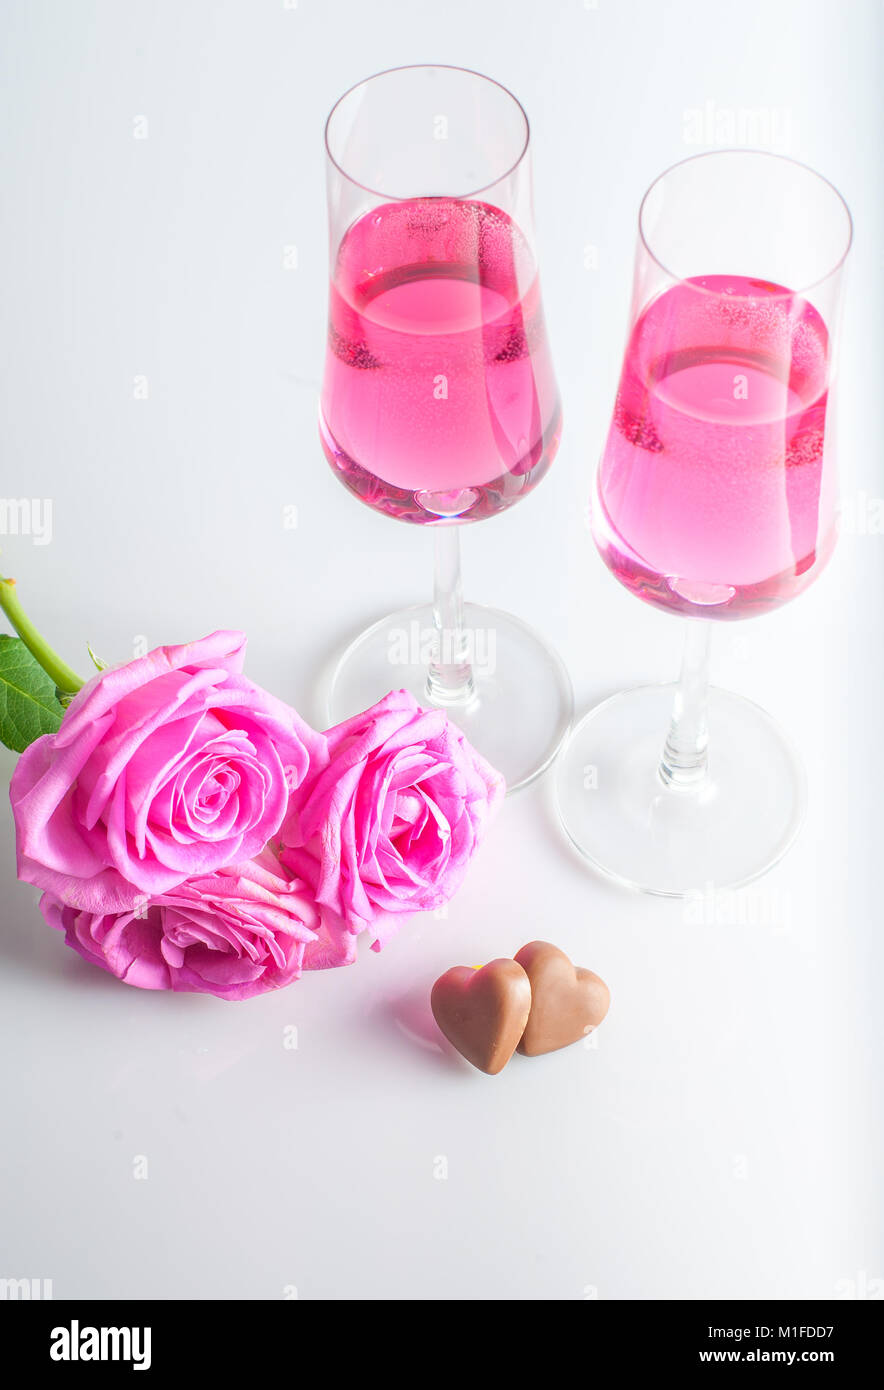 Chocolate hearts, rose flowers and two glasses of pink champagne. white background. selective focus. Stock Photo